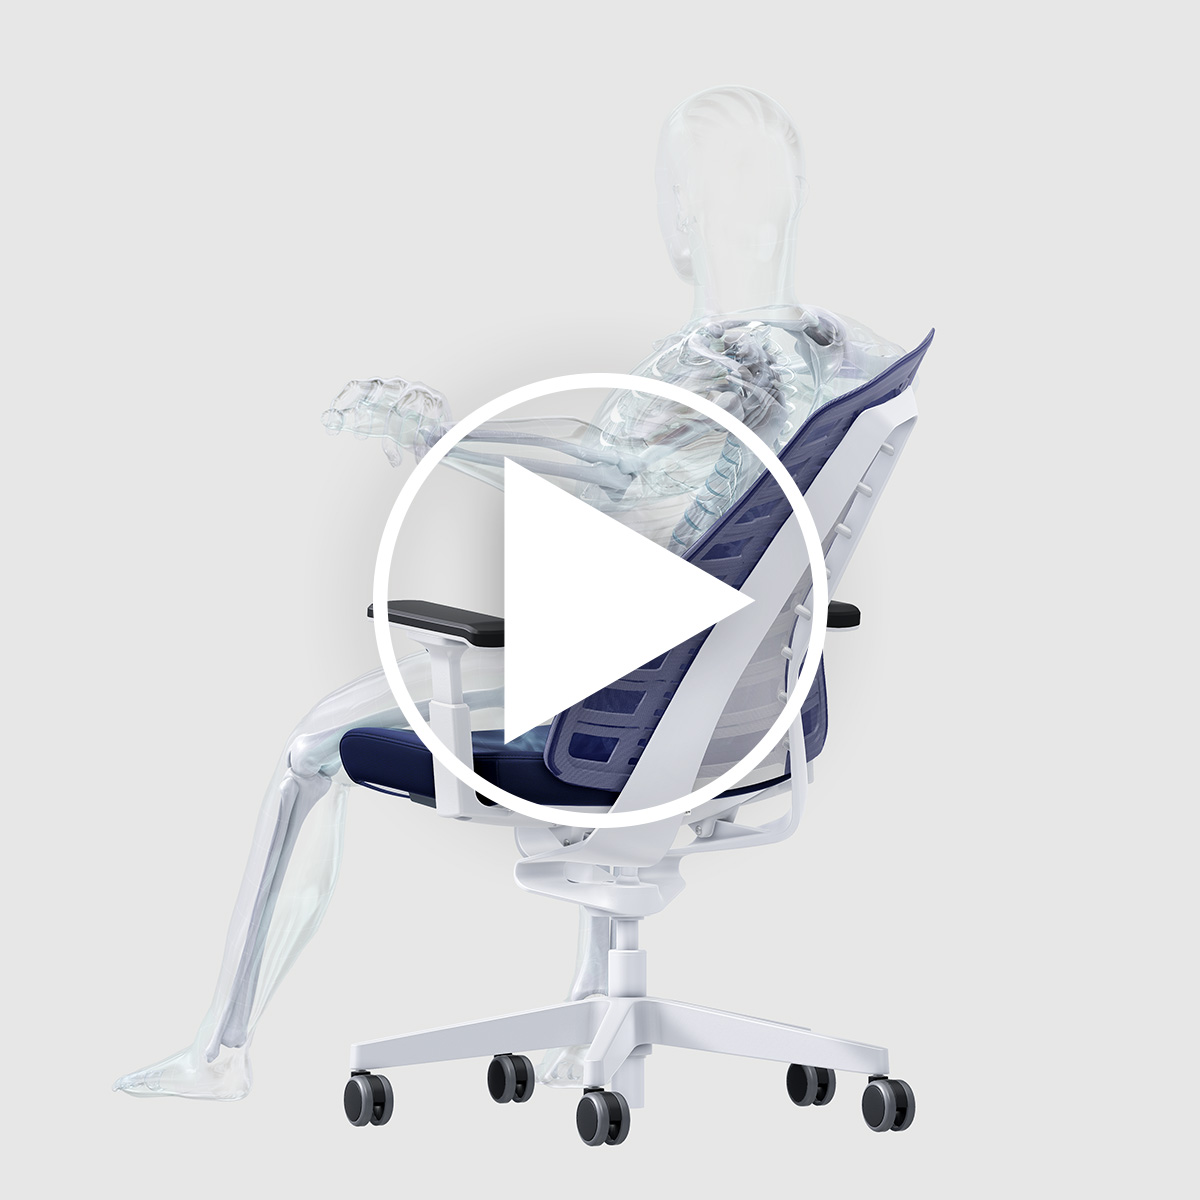 Video showing the three factors promoting the users' own health and ergonomics by means of a person on the PURE desk chair.